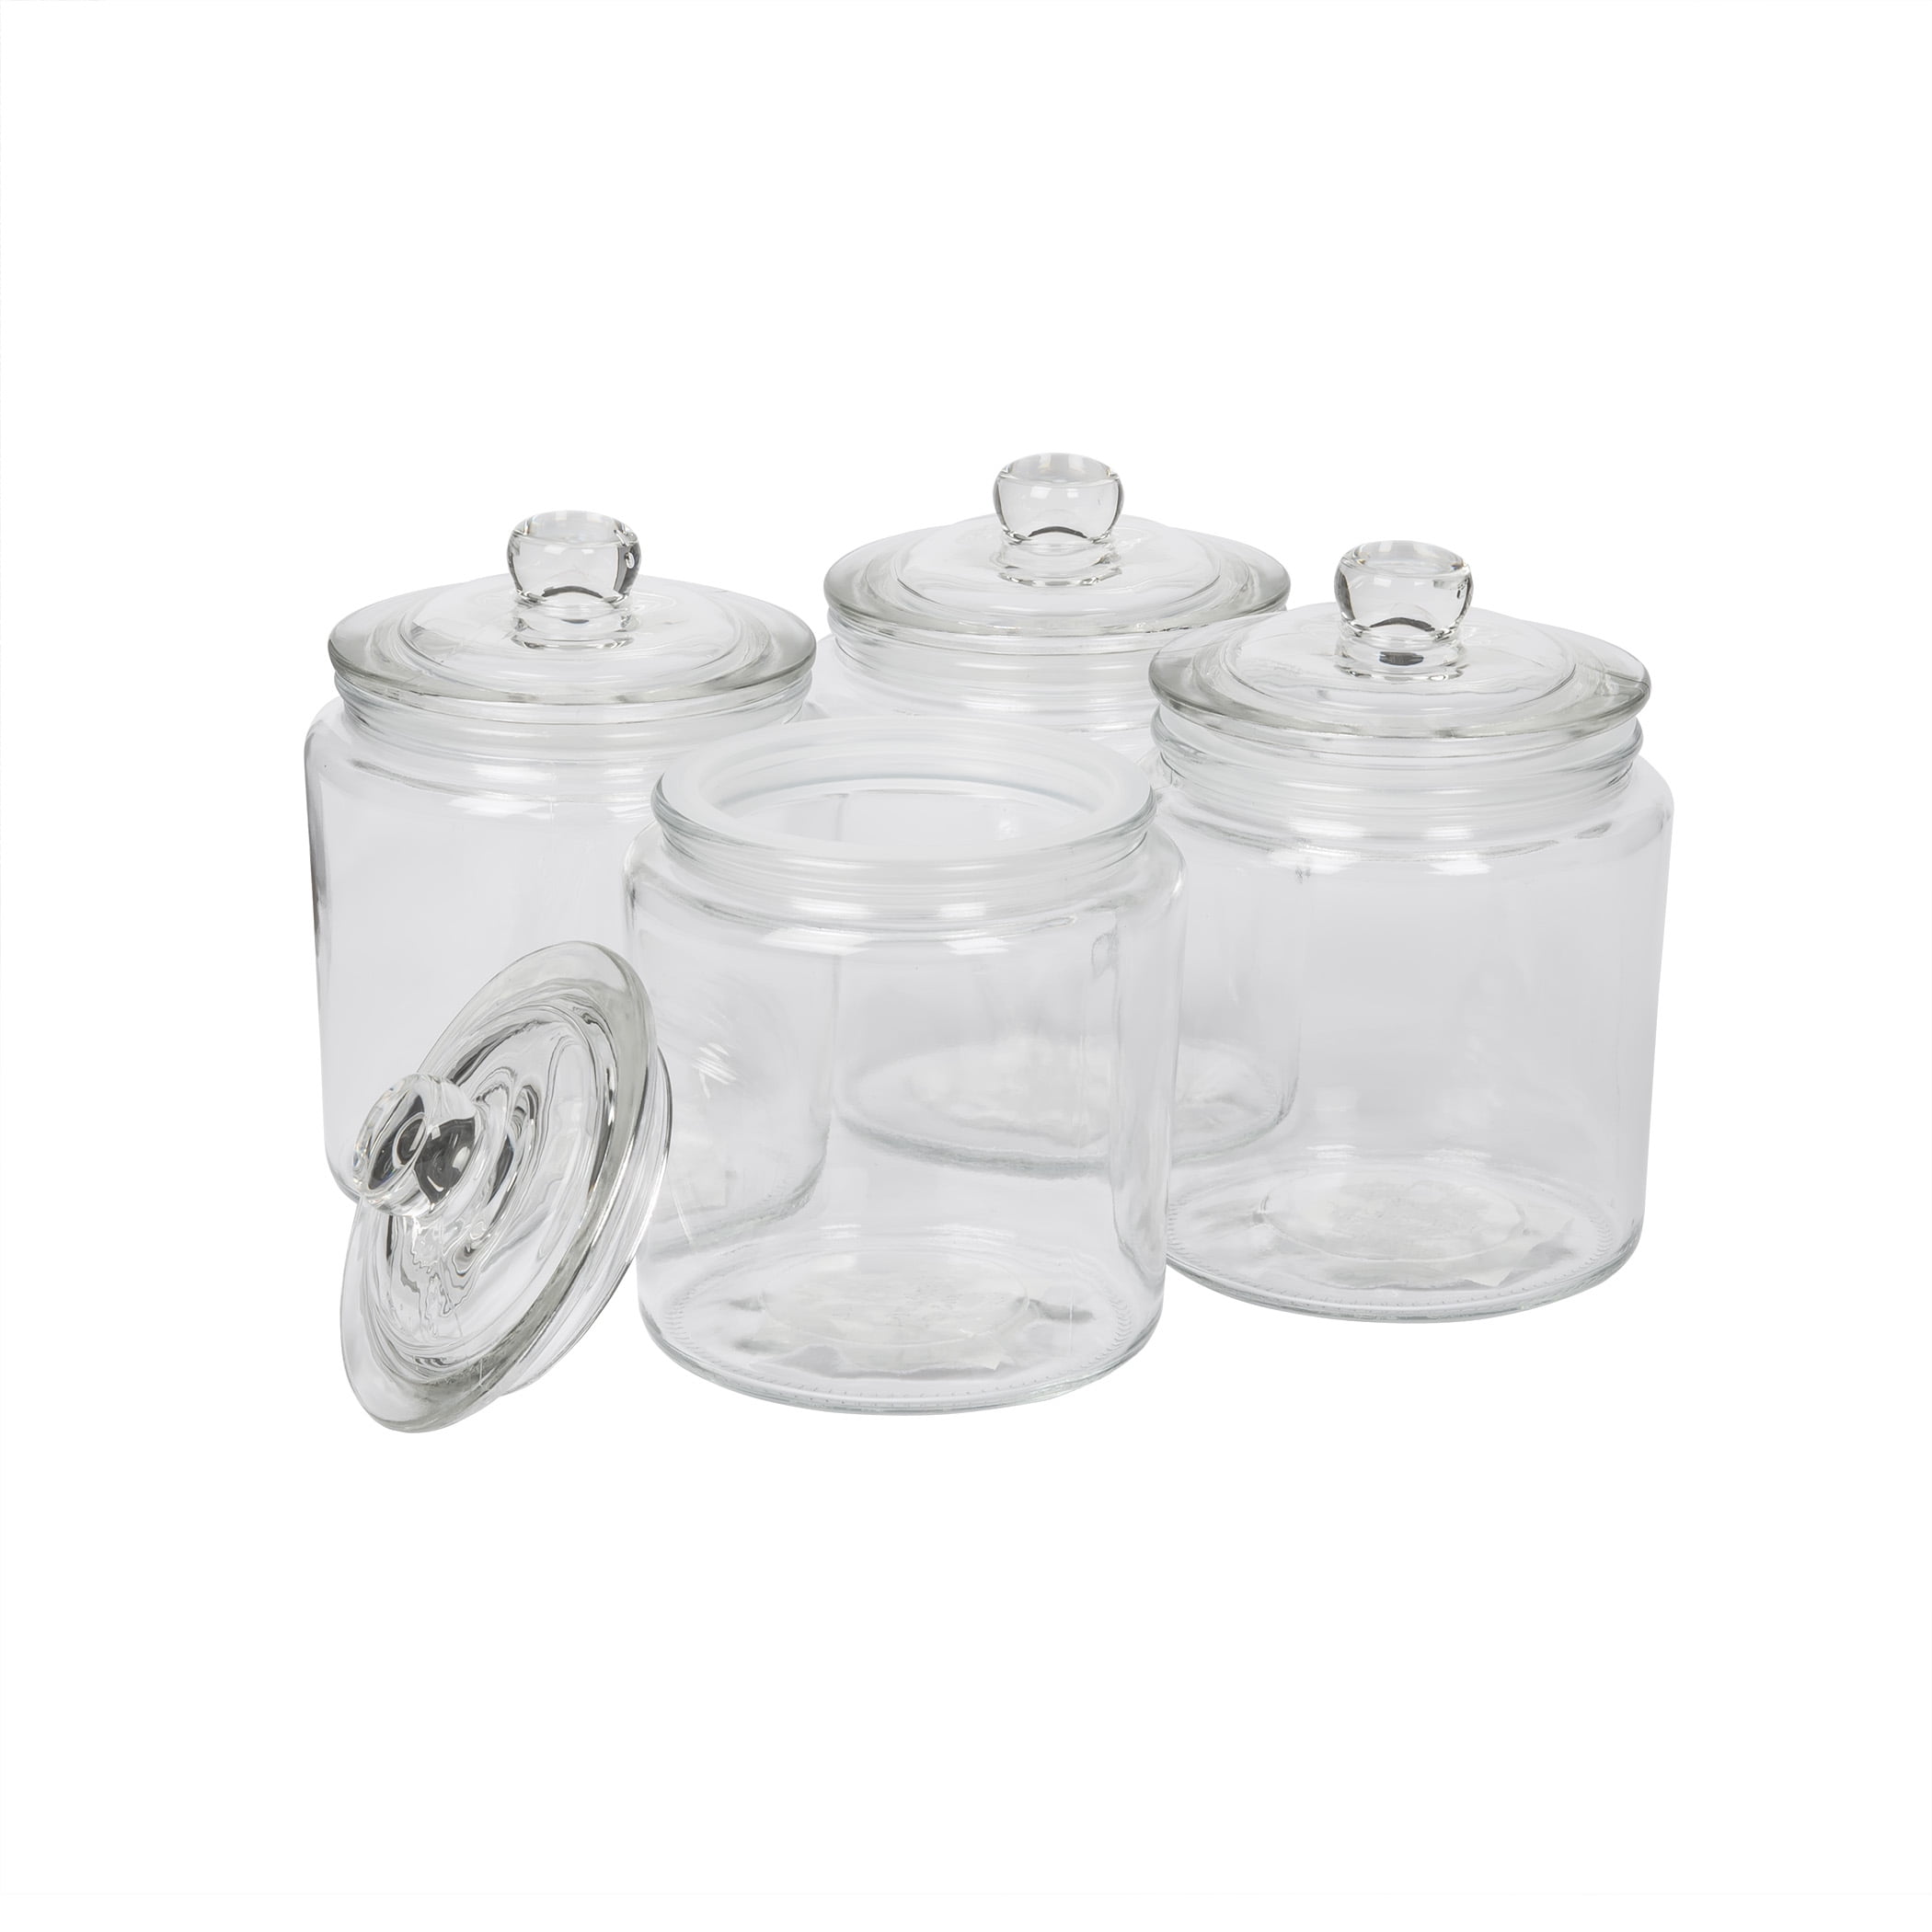 4.5 Ounce Apothecary Style Herb Jar with Glass Lid New